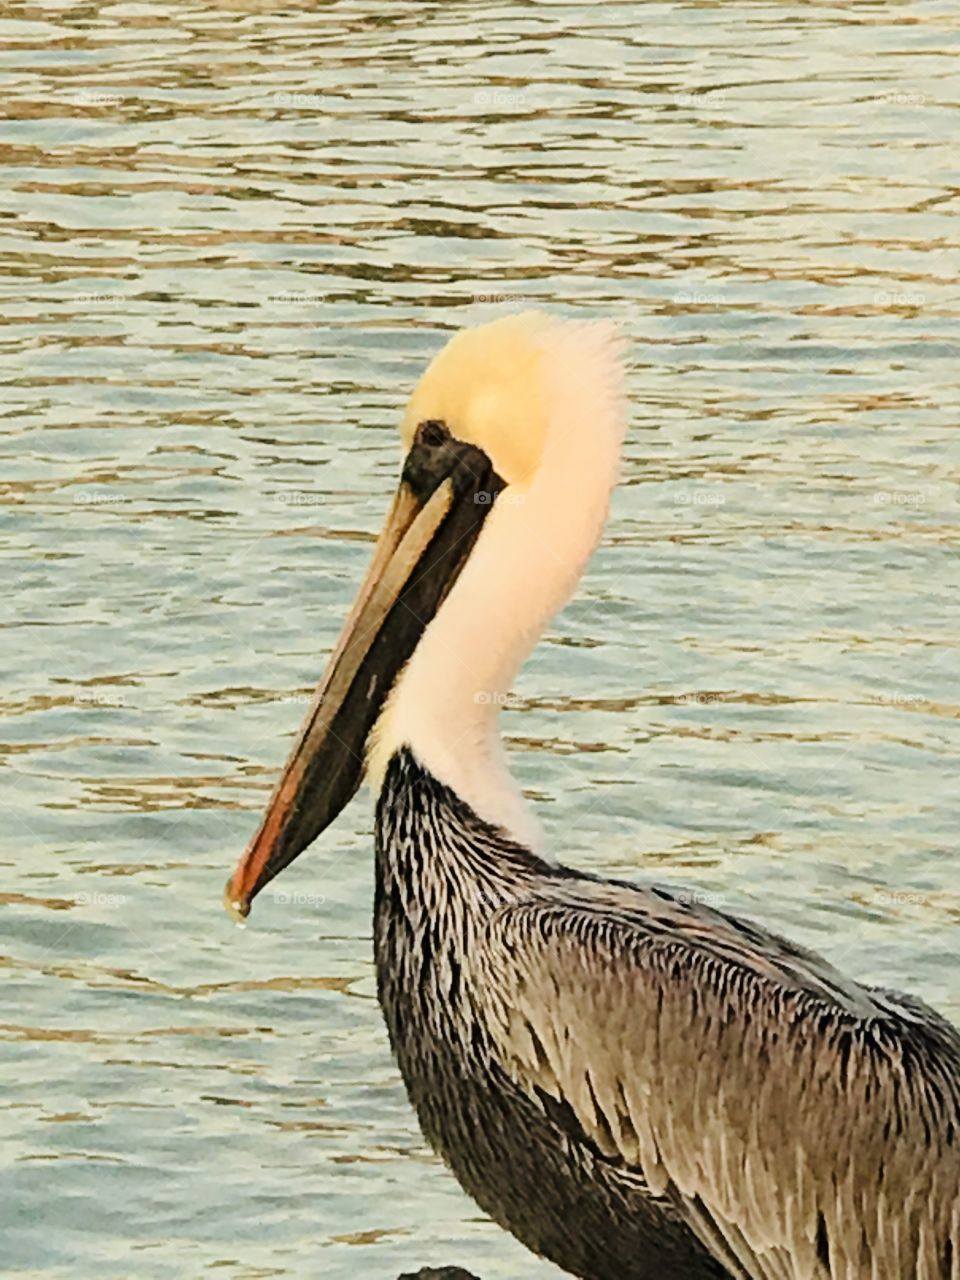 A pelican by the water